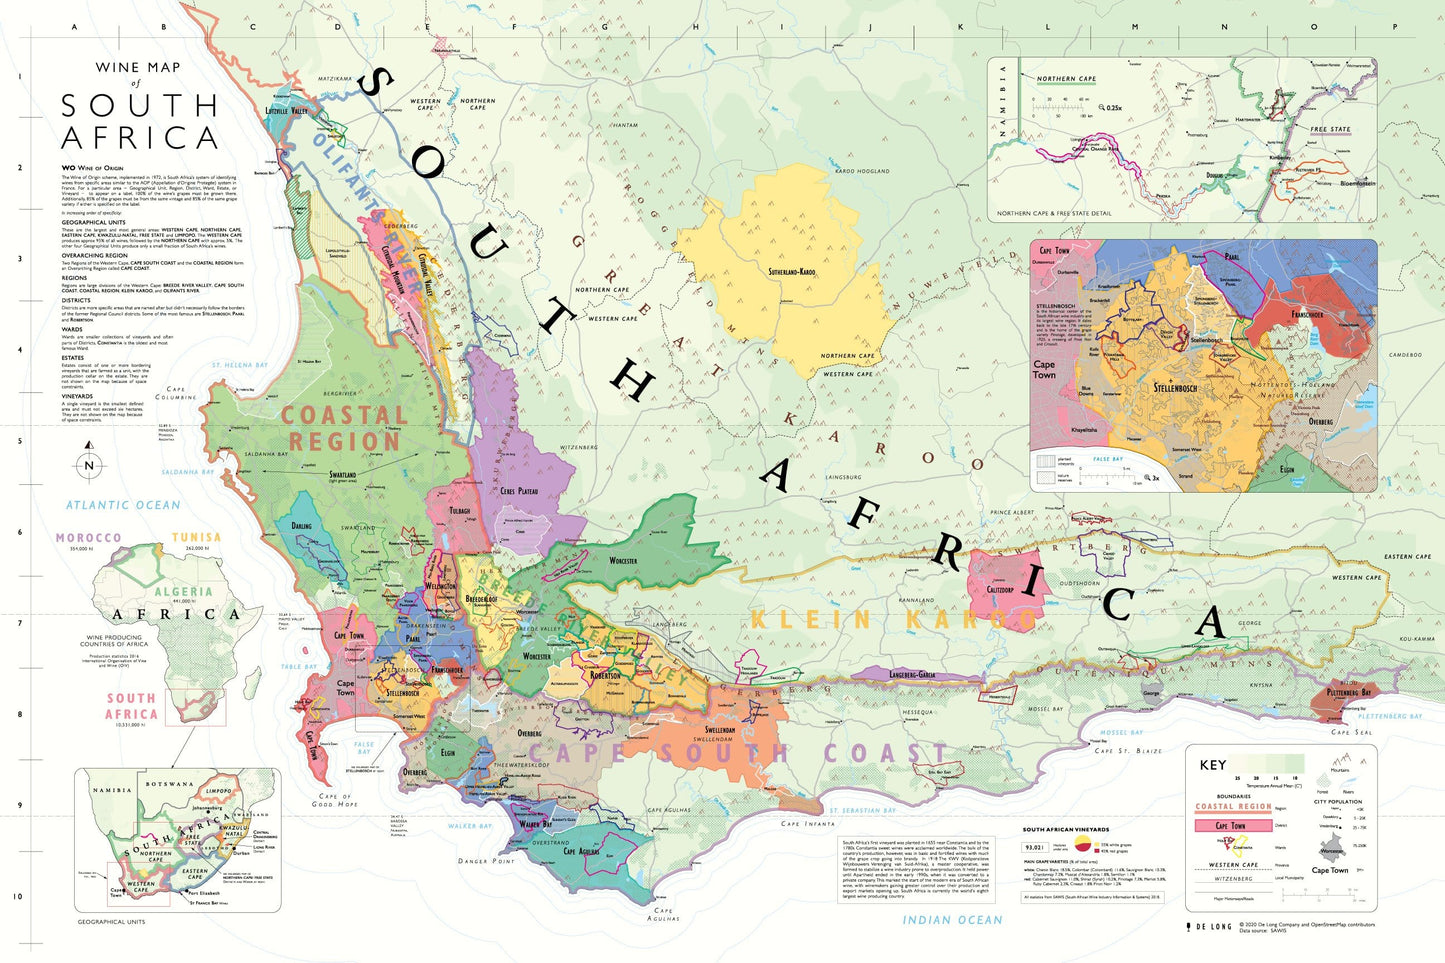 Wine Map of South Africa